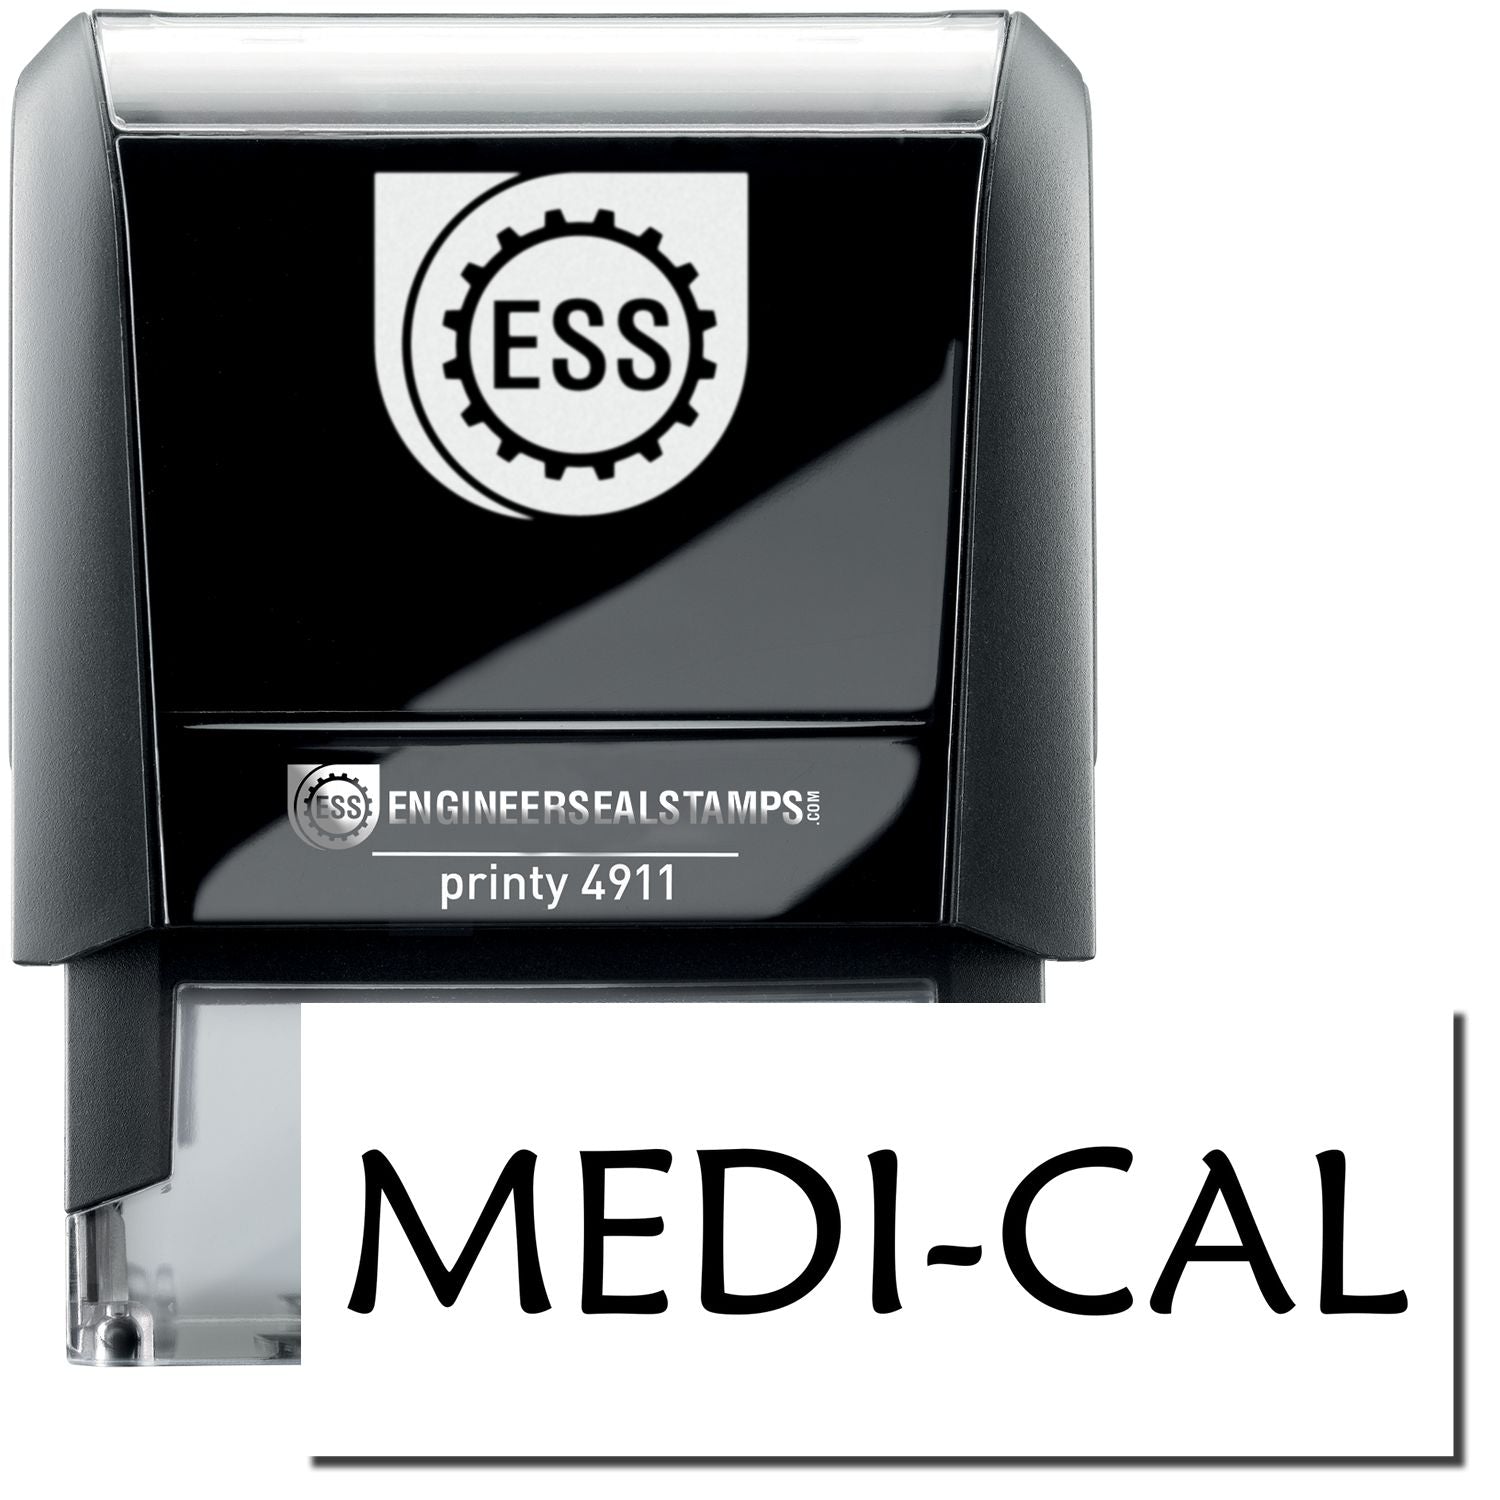 A self-inking stamp with a stamped image showing how the text "MEDI-CAL" is displayed after stamping.